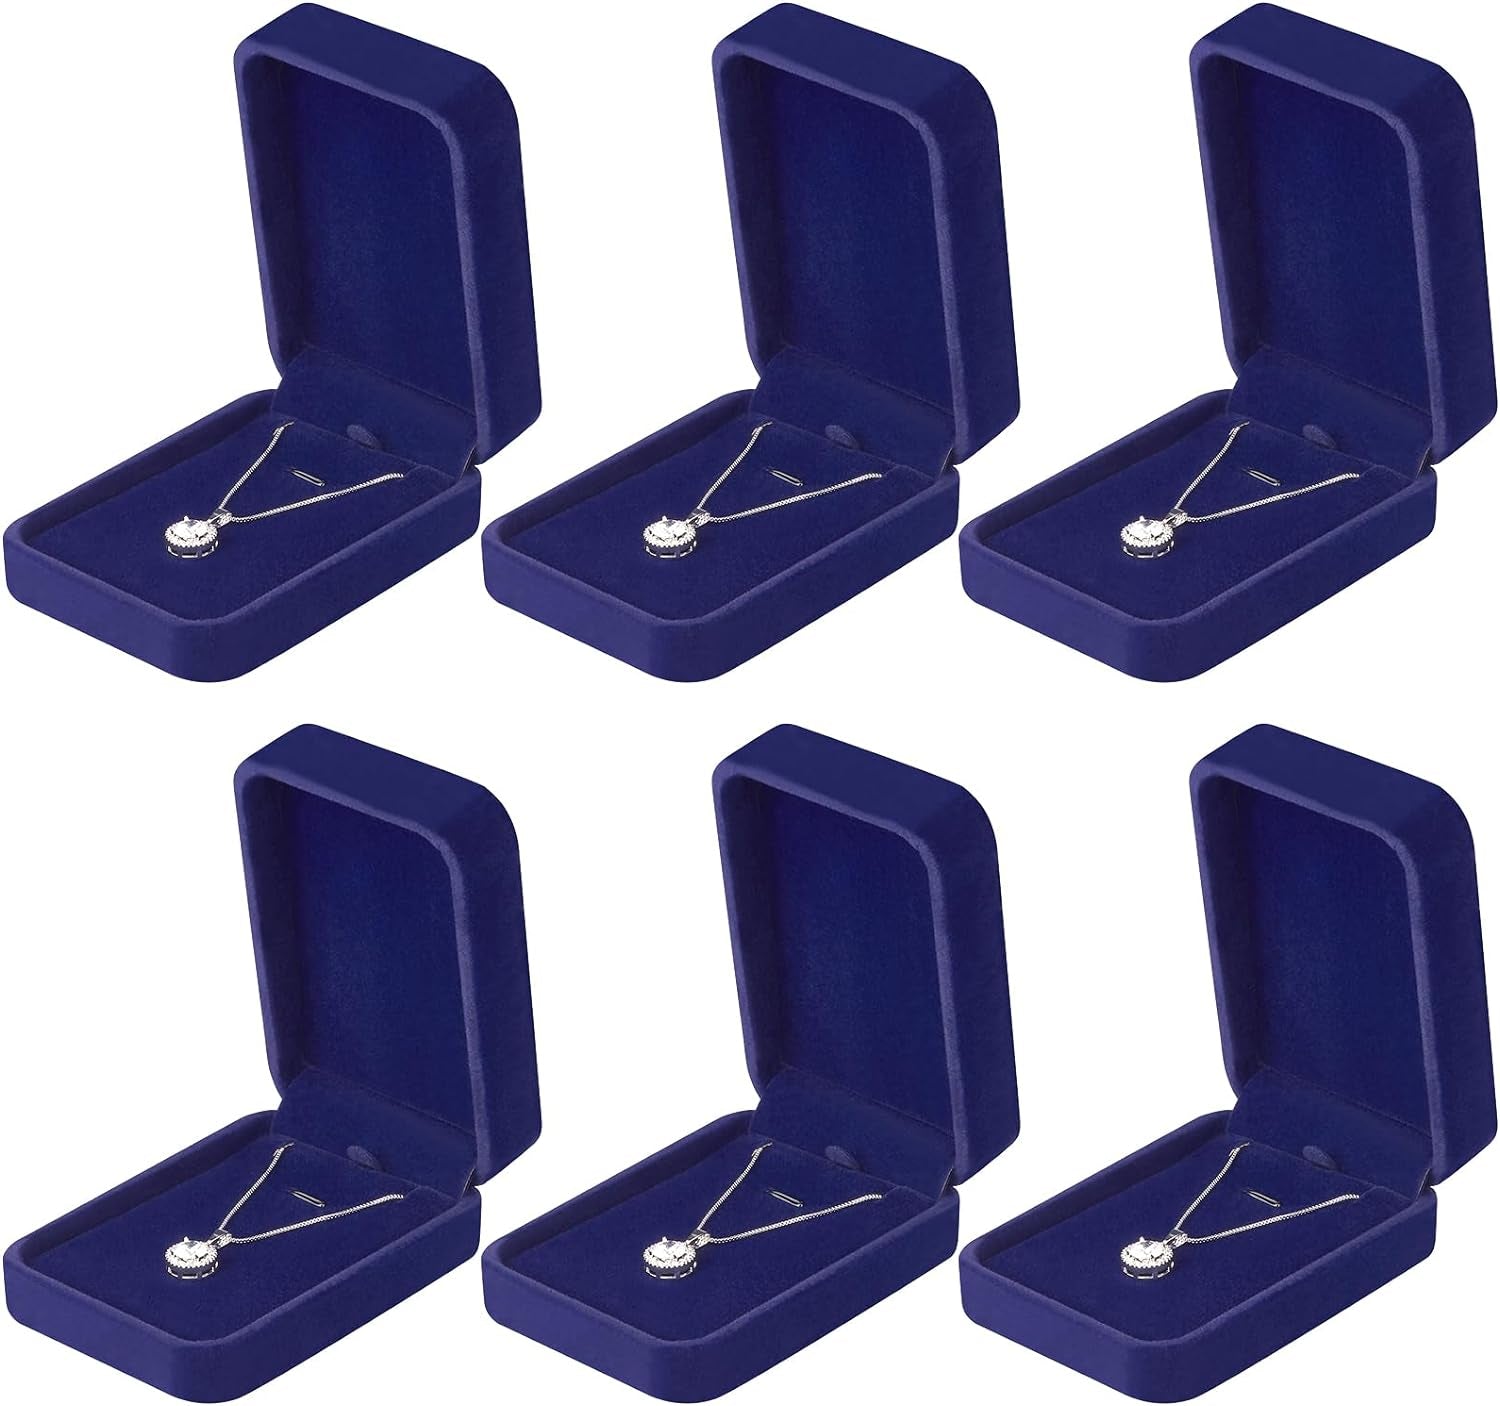 LETURE 6 Pieces Velvet Jewelry Gift Boxes for Necklace Pendant Bracelet Ring Earring, Jewelry Storage Display Case for Christmas Wedding Engagement Birthday Anniversary (Pendant Box STYLE-6PCS)